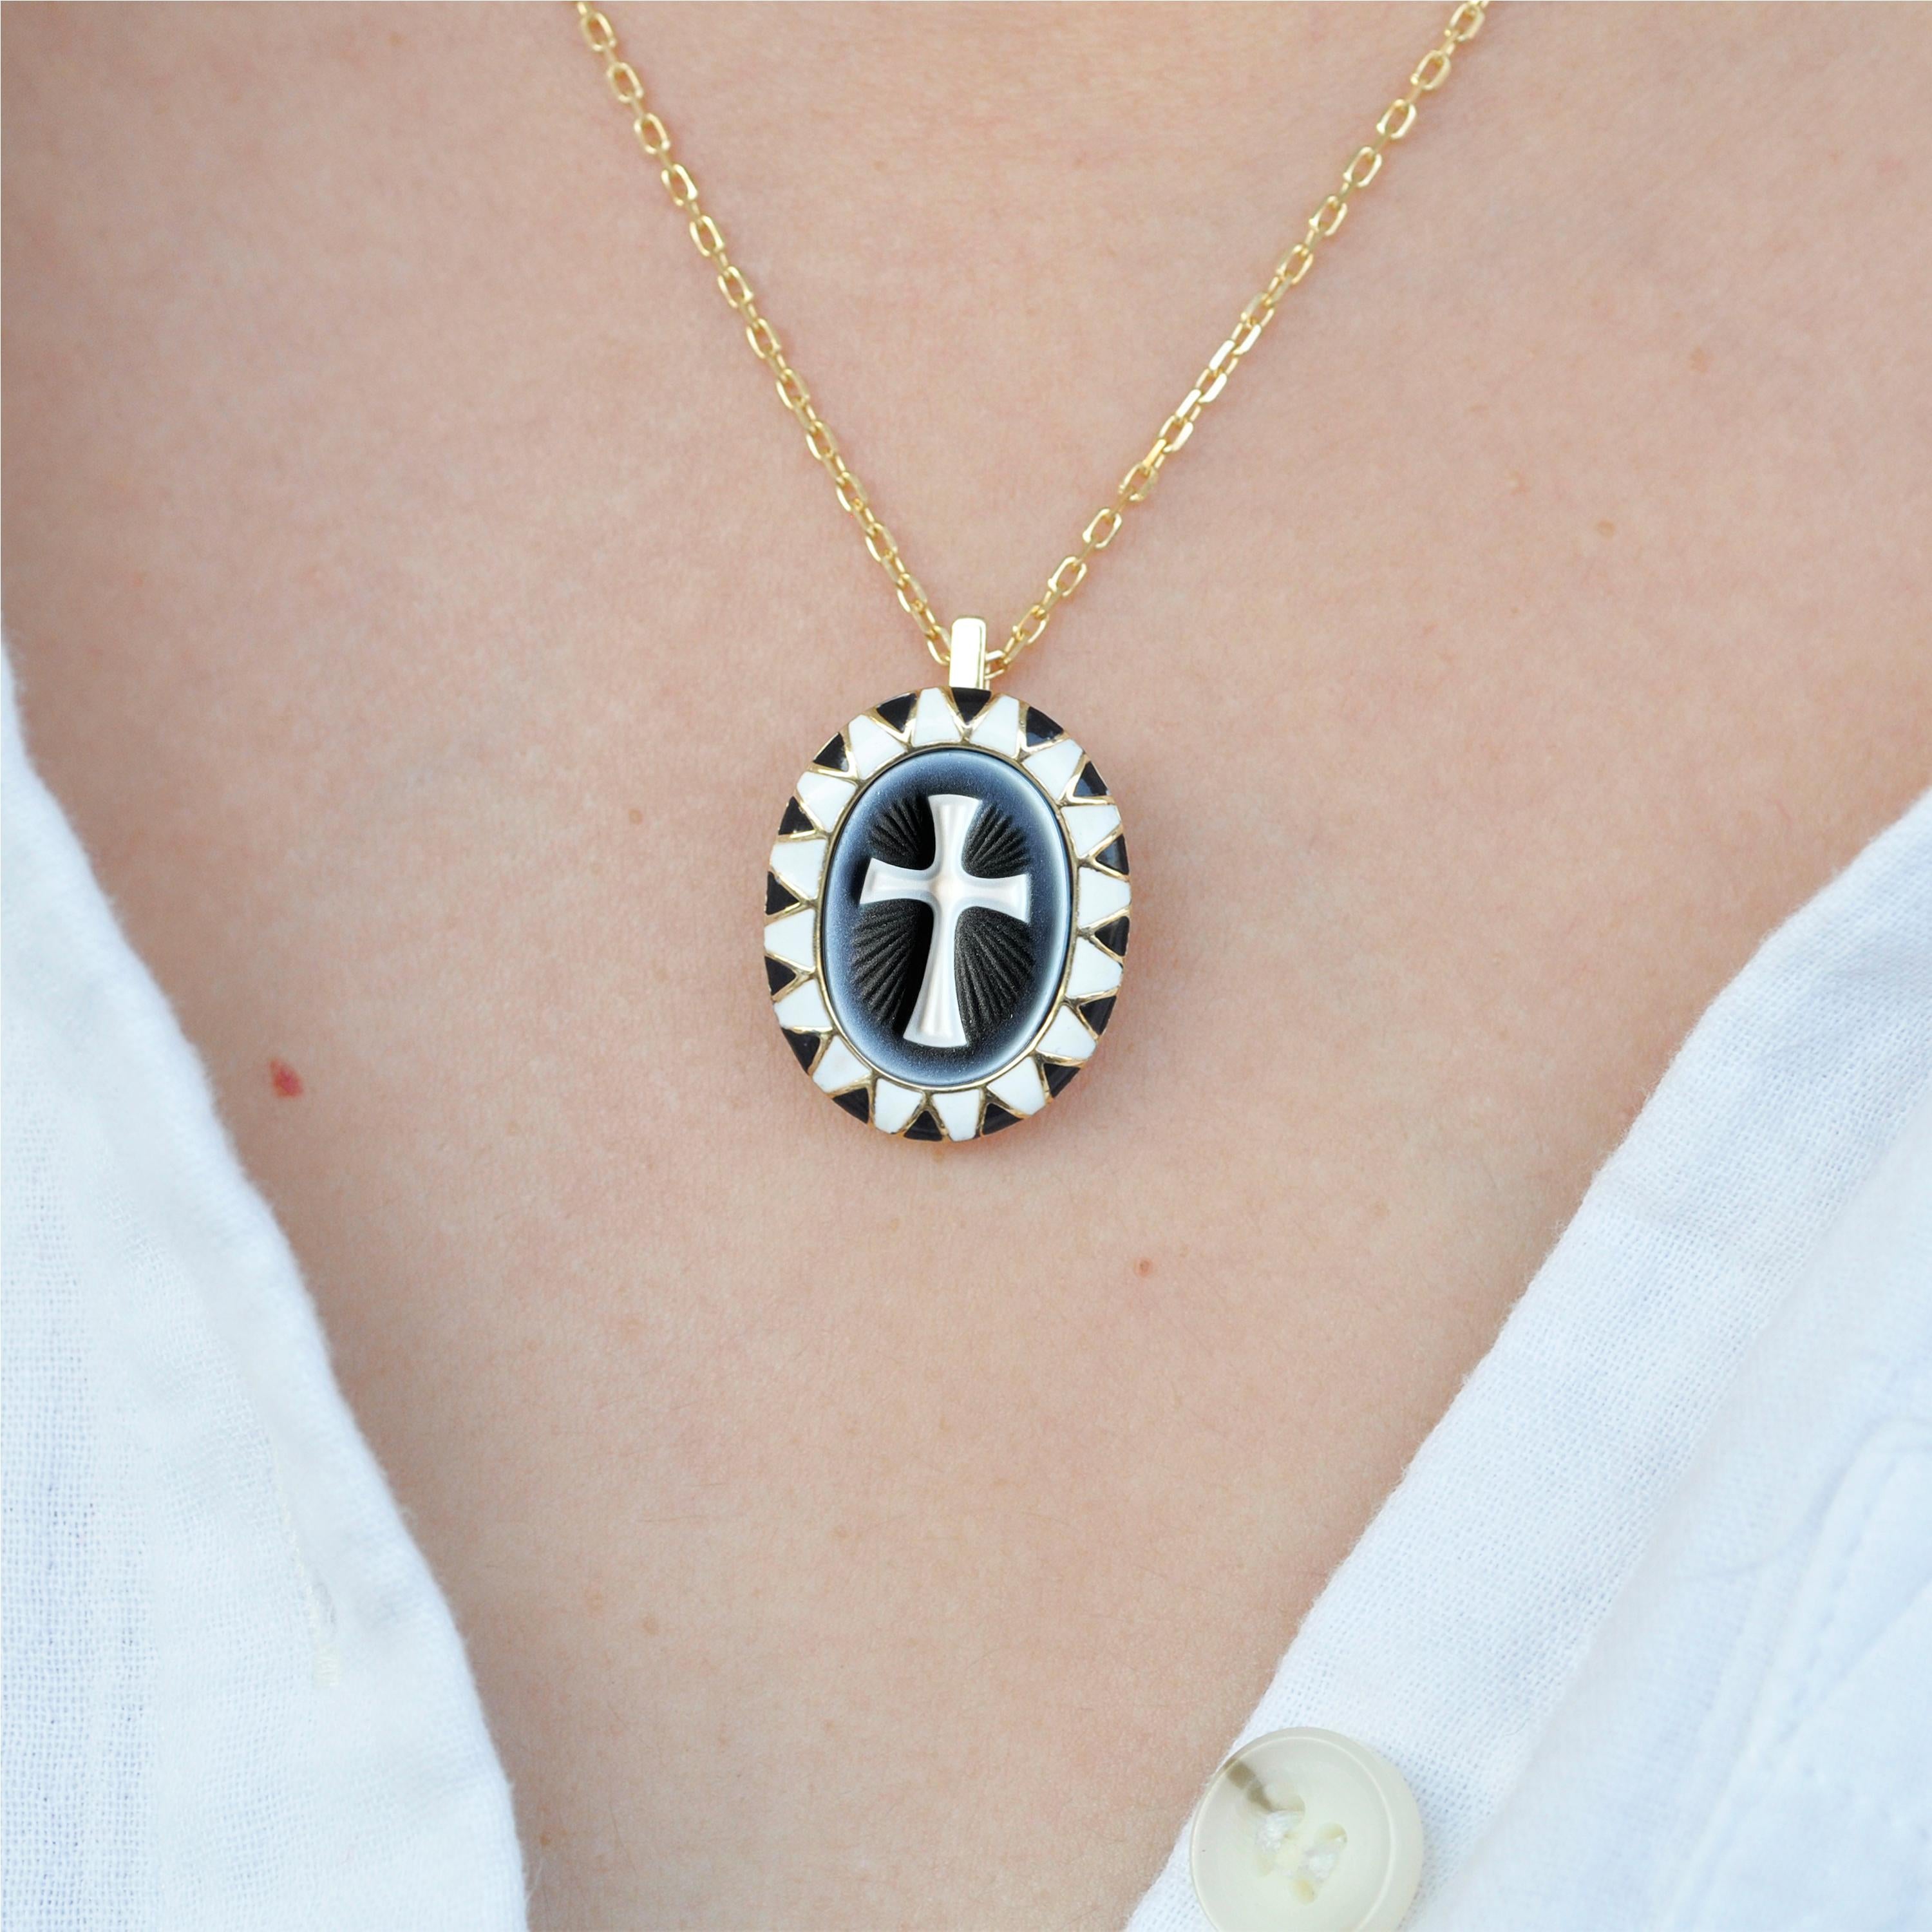 18 karat gold cross agate cameo black white enamel pendant

This cross cameo can be set in 18 karat gold carved by our master german engraver on the relief of a natural agate gemstone. The size of the cameo is 18x13 mm oval which is a good size. You